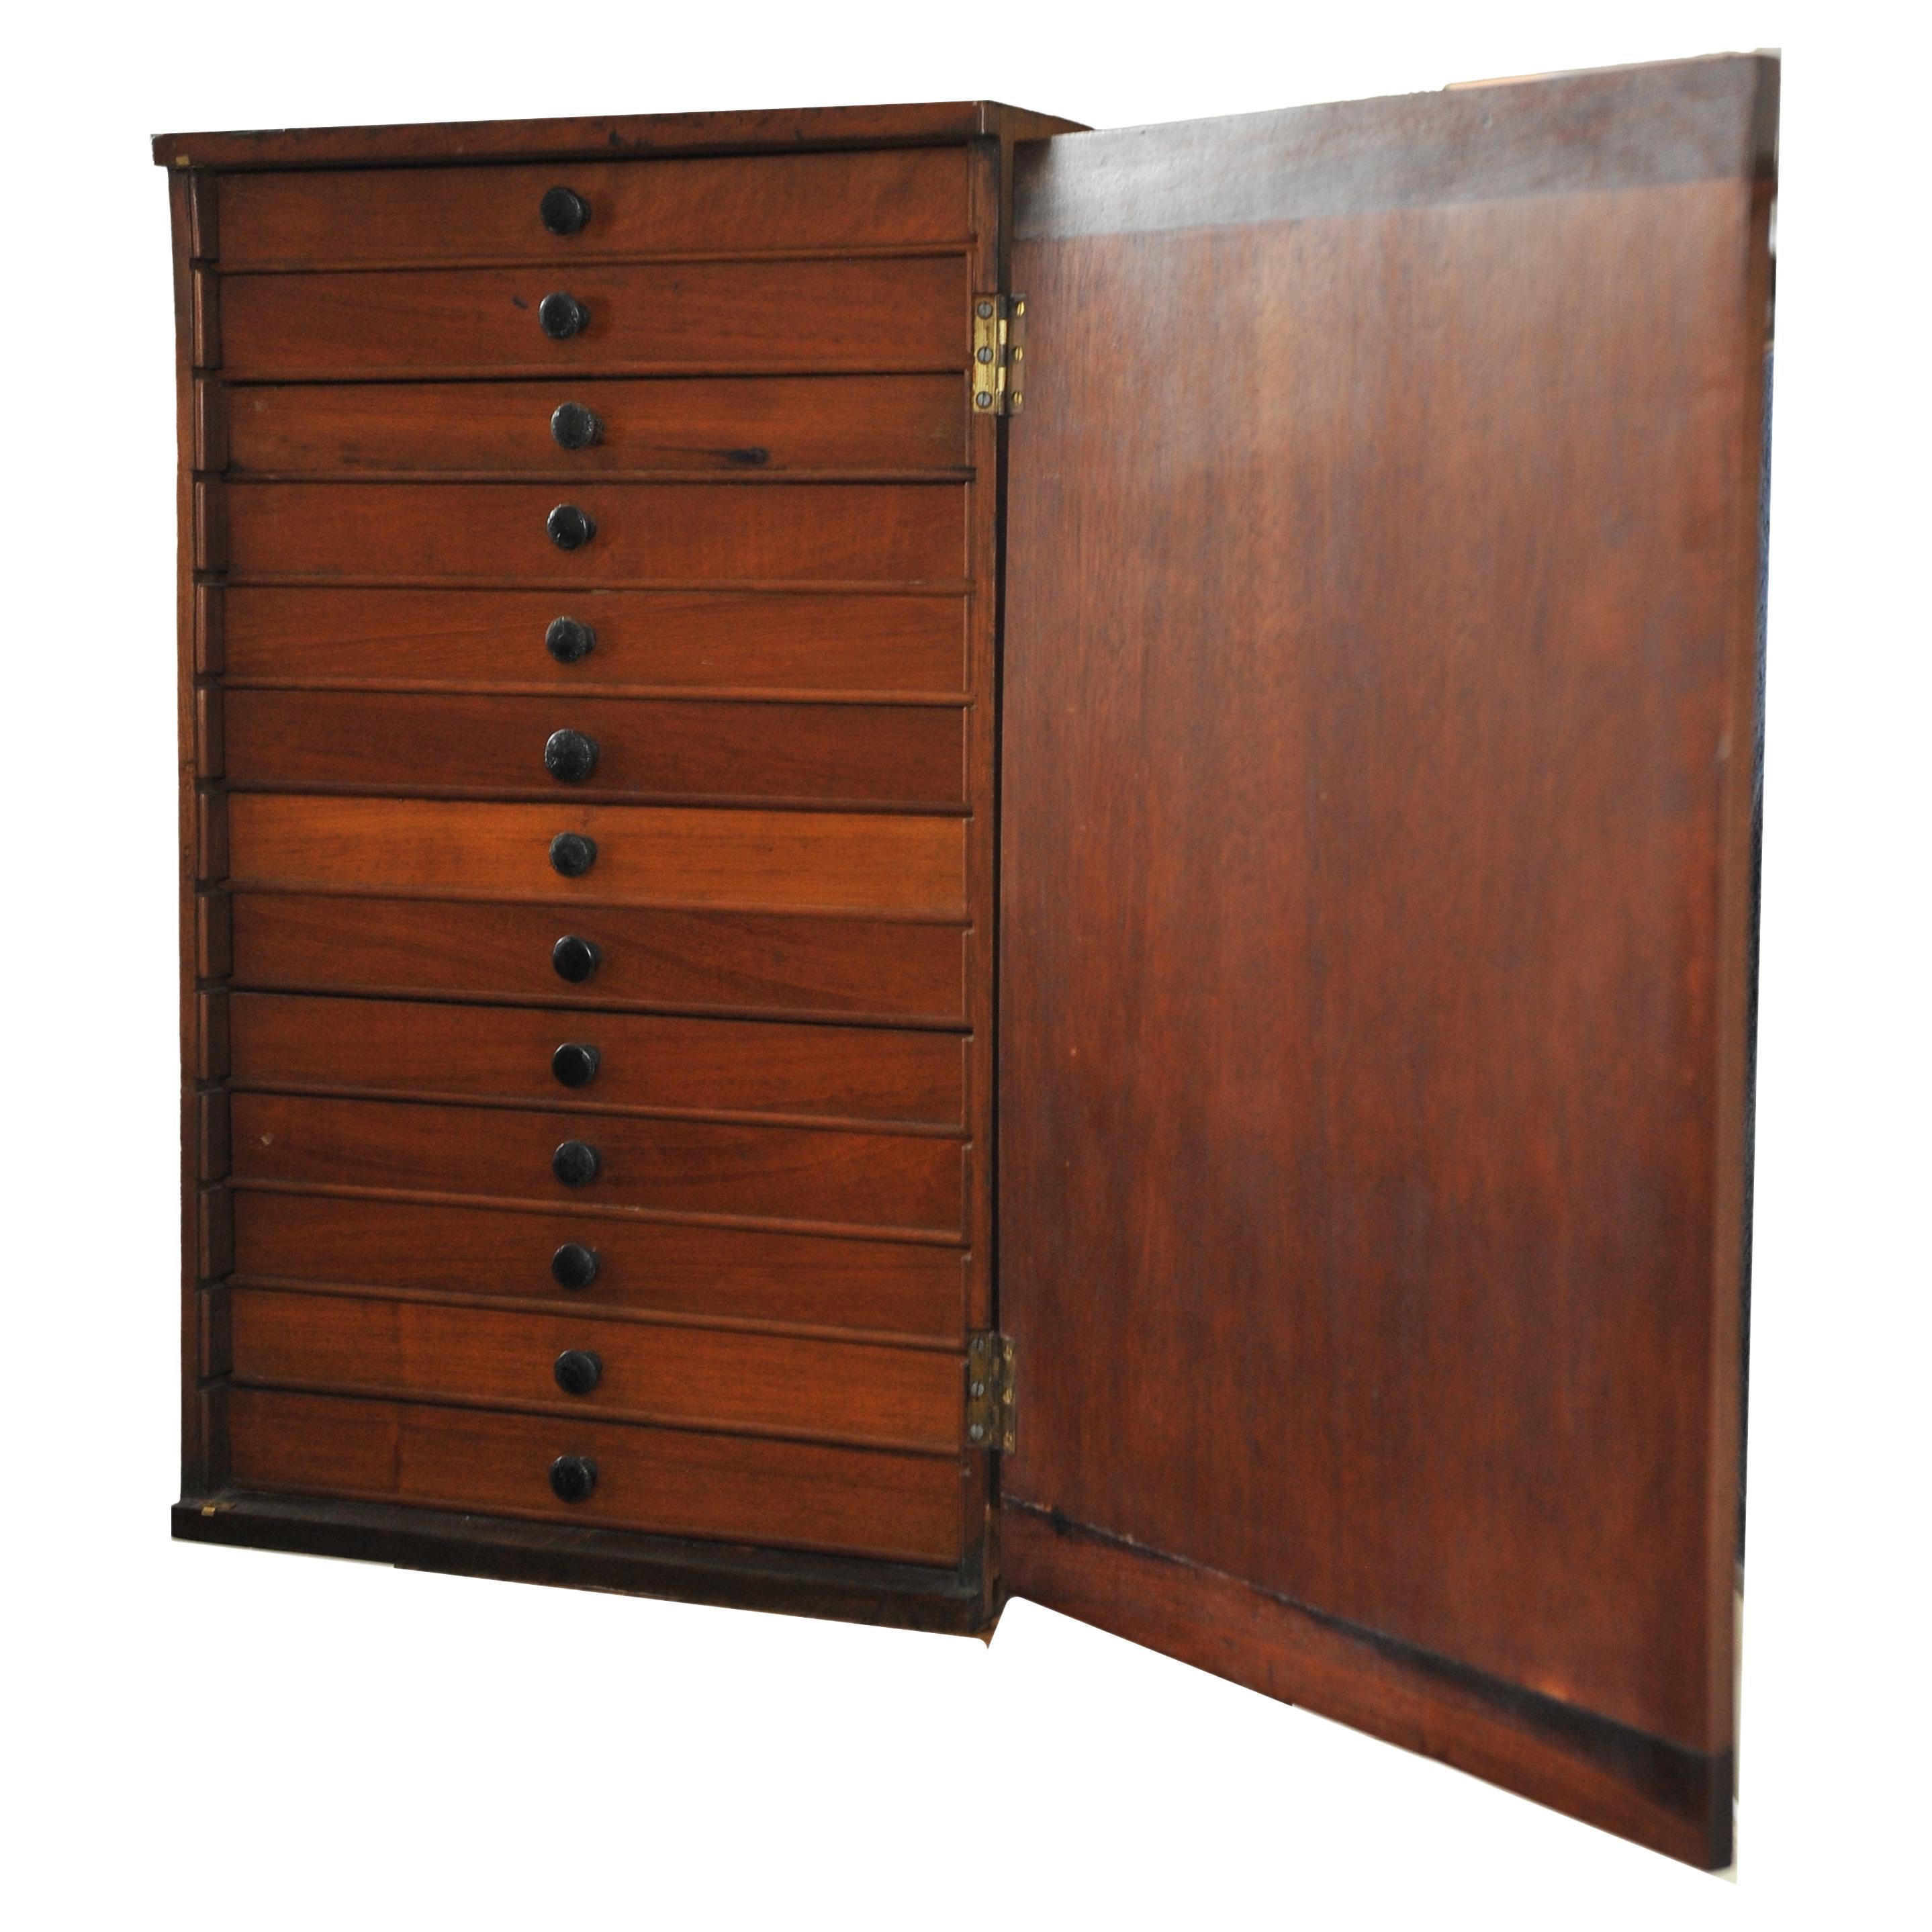 Victorian Collectors Cabinet With Thirteen Fitted Drawers & Ebonised Handles 
of rectangular form with a single panelled door opening to reveal 13 drawers, English, circa 1850.